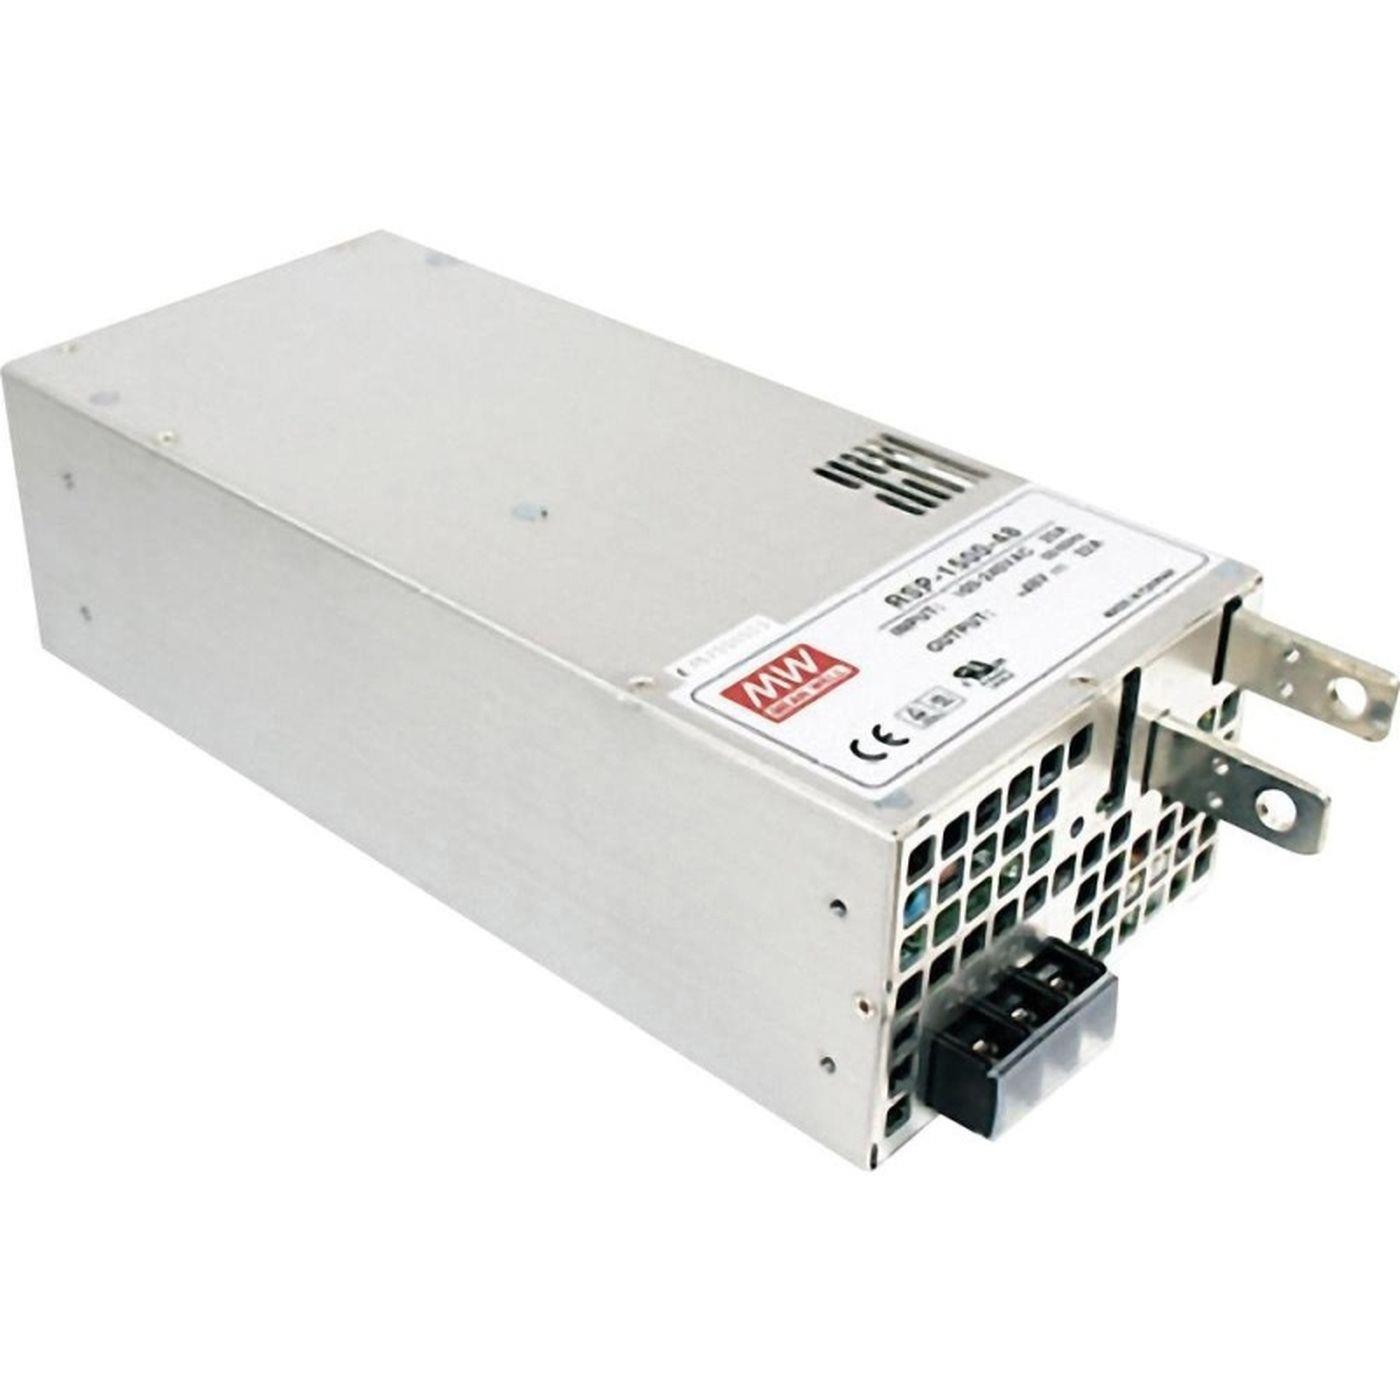 RSP-1500-15 1500W 15V 100A Industrial power supply